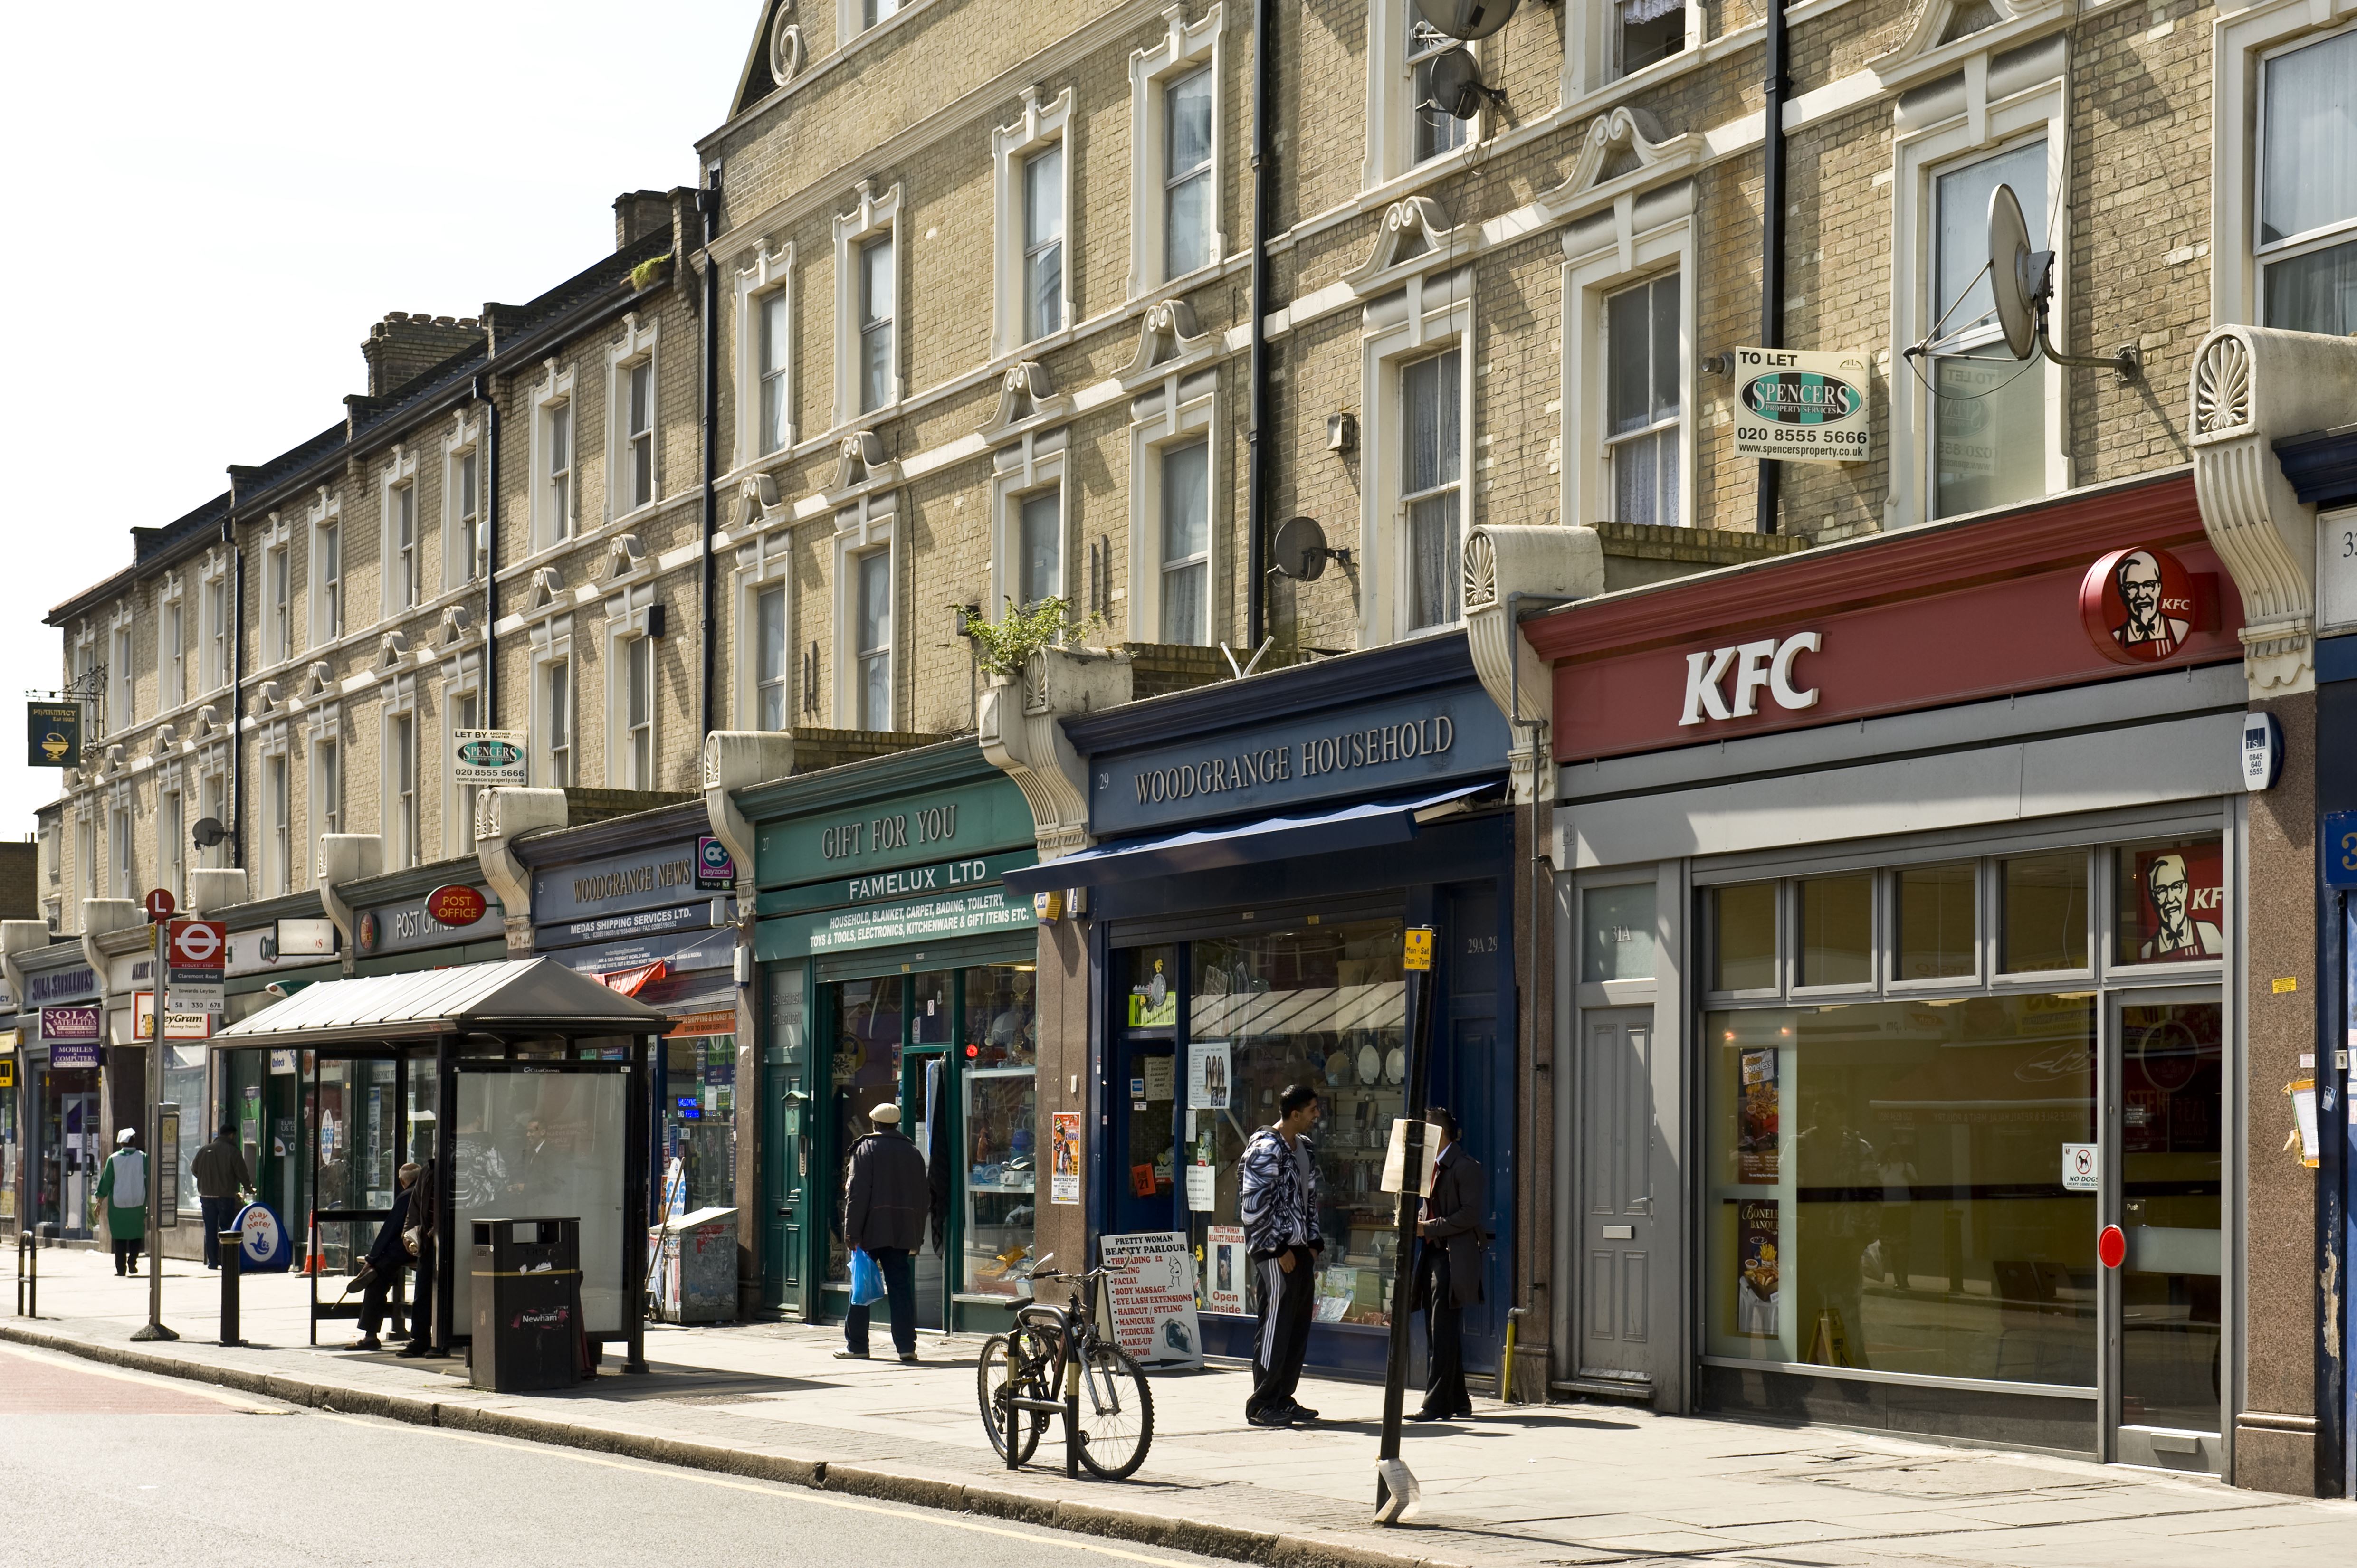 Exteriors of Woodgrange Road commercial premises as shoppers make their way along the sunny street.